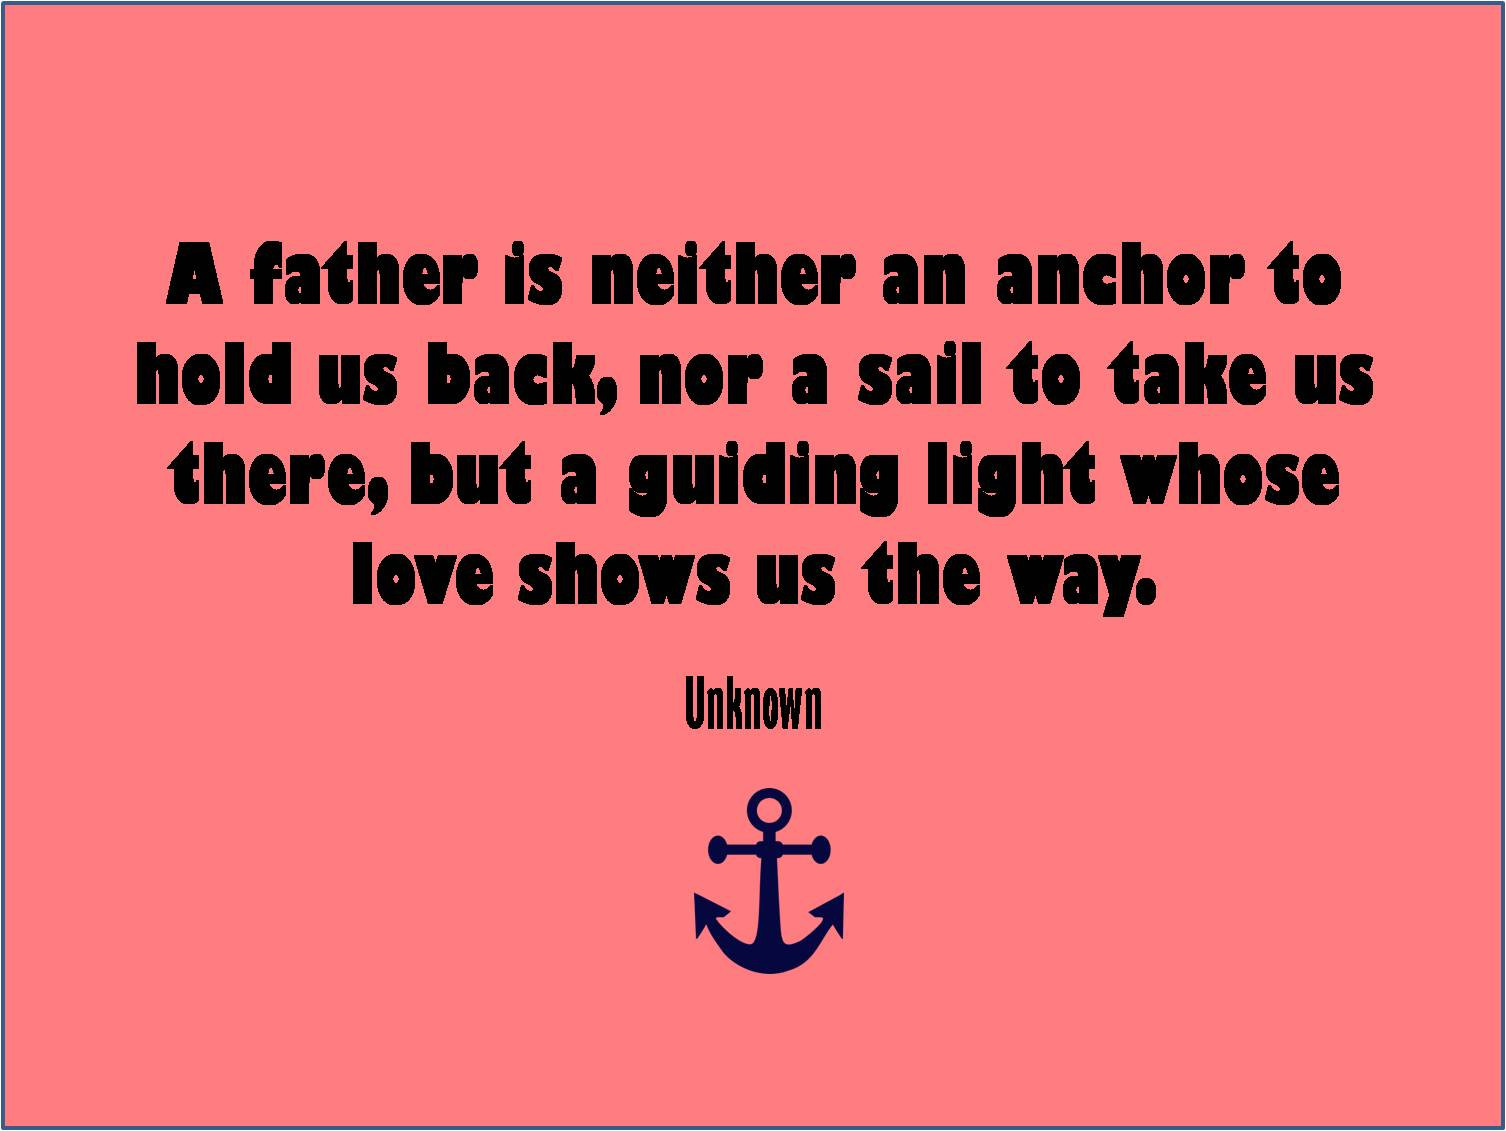 Happy Fathers Day Quotes
 6 Best and inspirational Happy Father’s Day Quotes